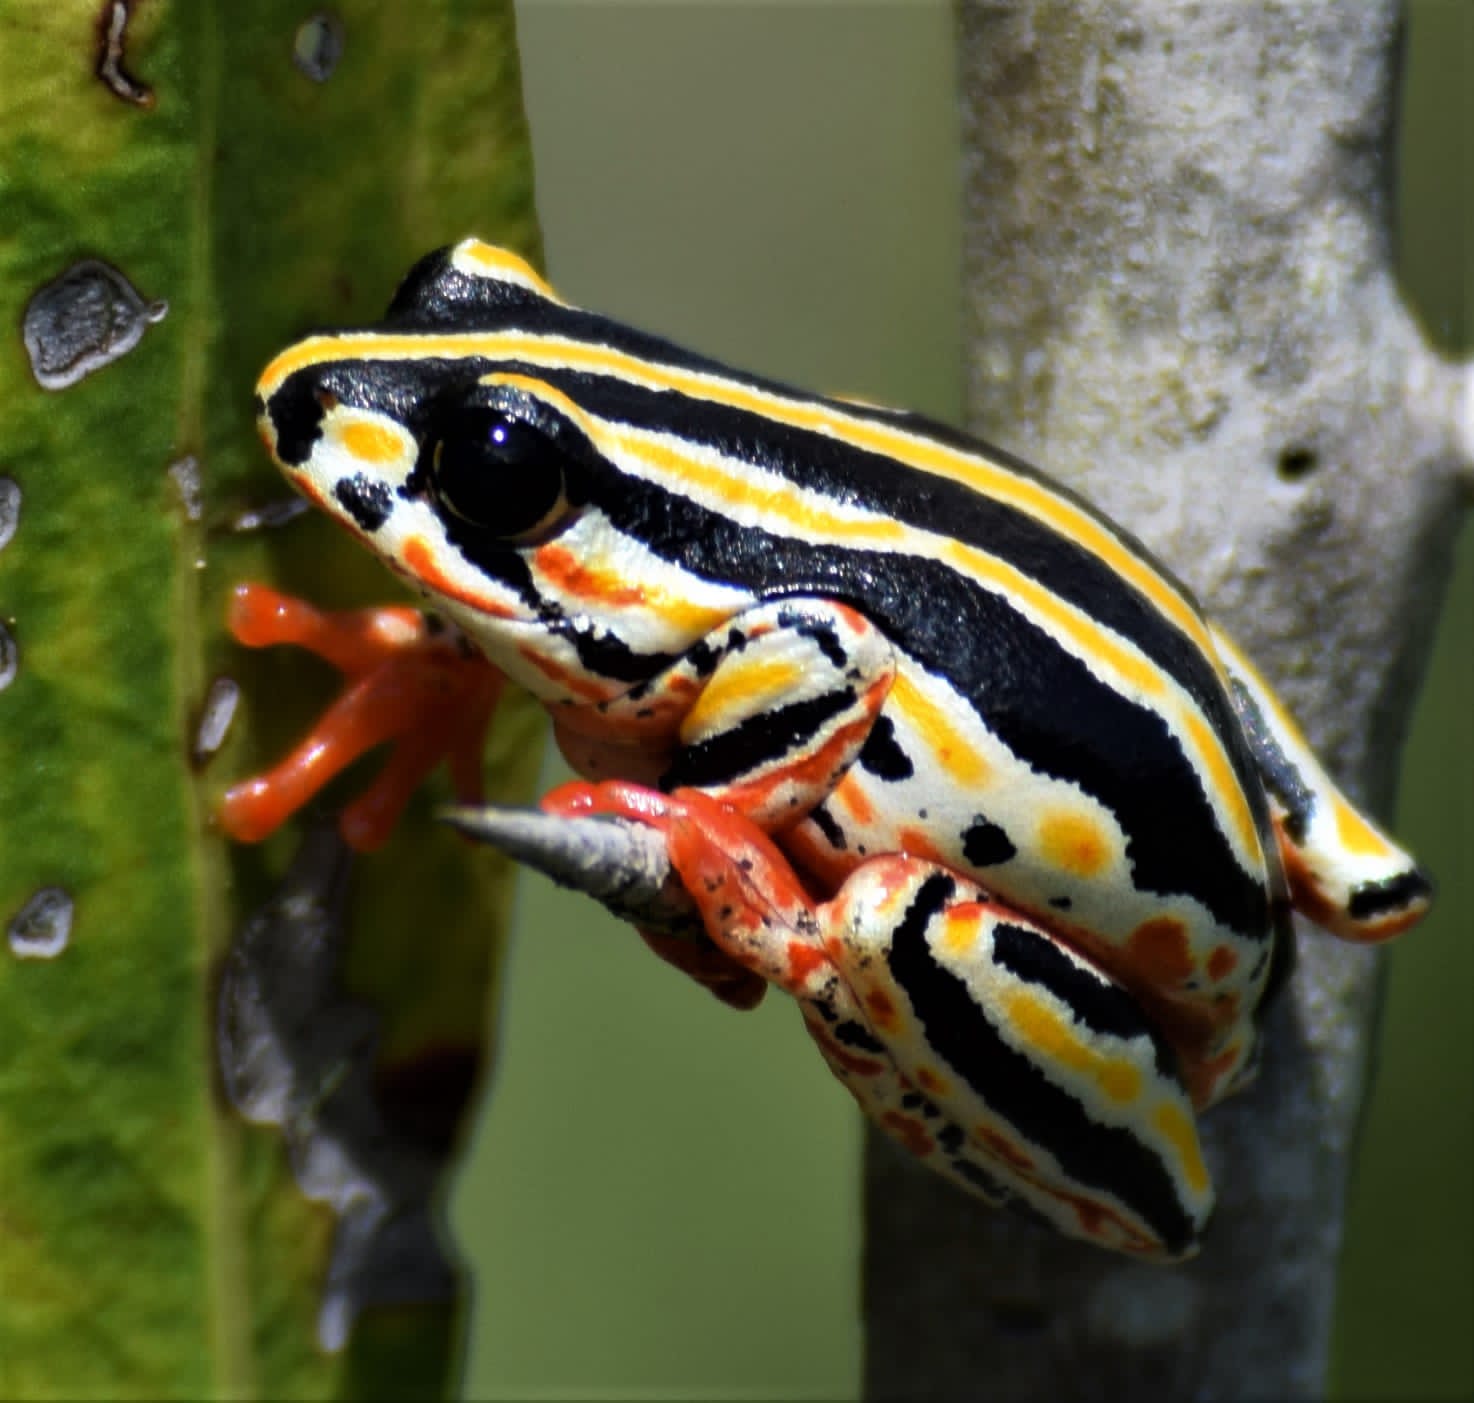 Painted Reed Frog. Source: Frogs of Southern Africa Book